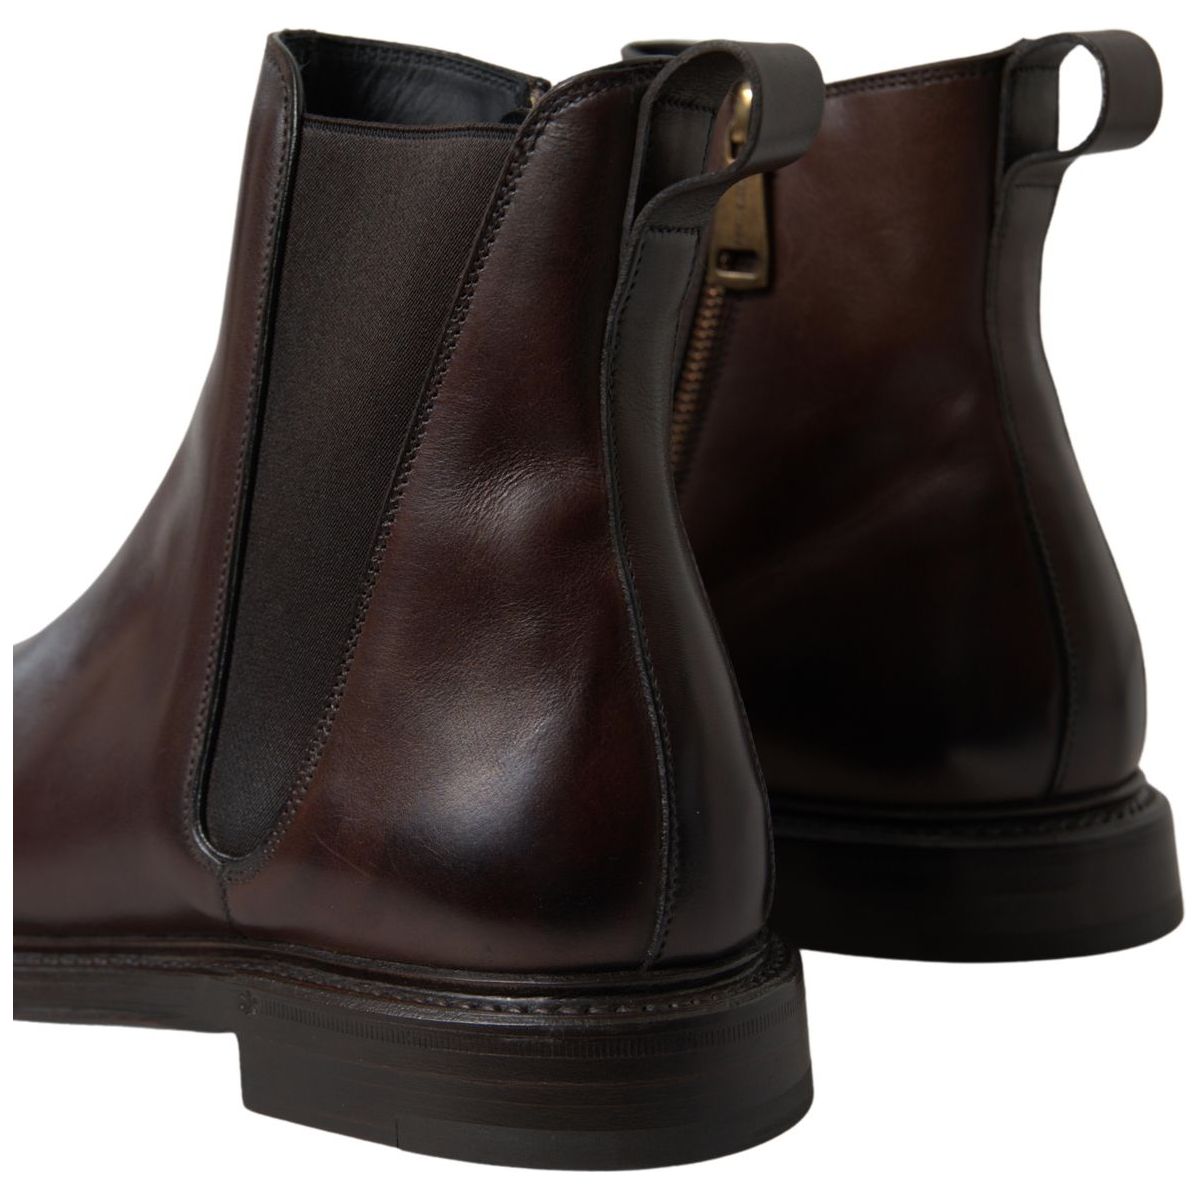 Dolce & Gabbana Elegant Leather Chelsea Boots brown-leather-chelsea-mens-boots-shoes 465A8388-8904c33b-fa6.jpg